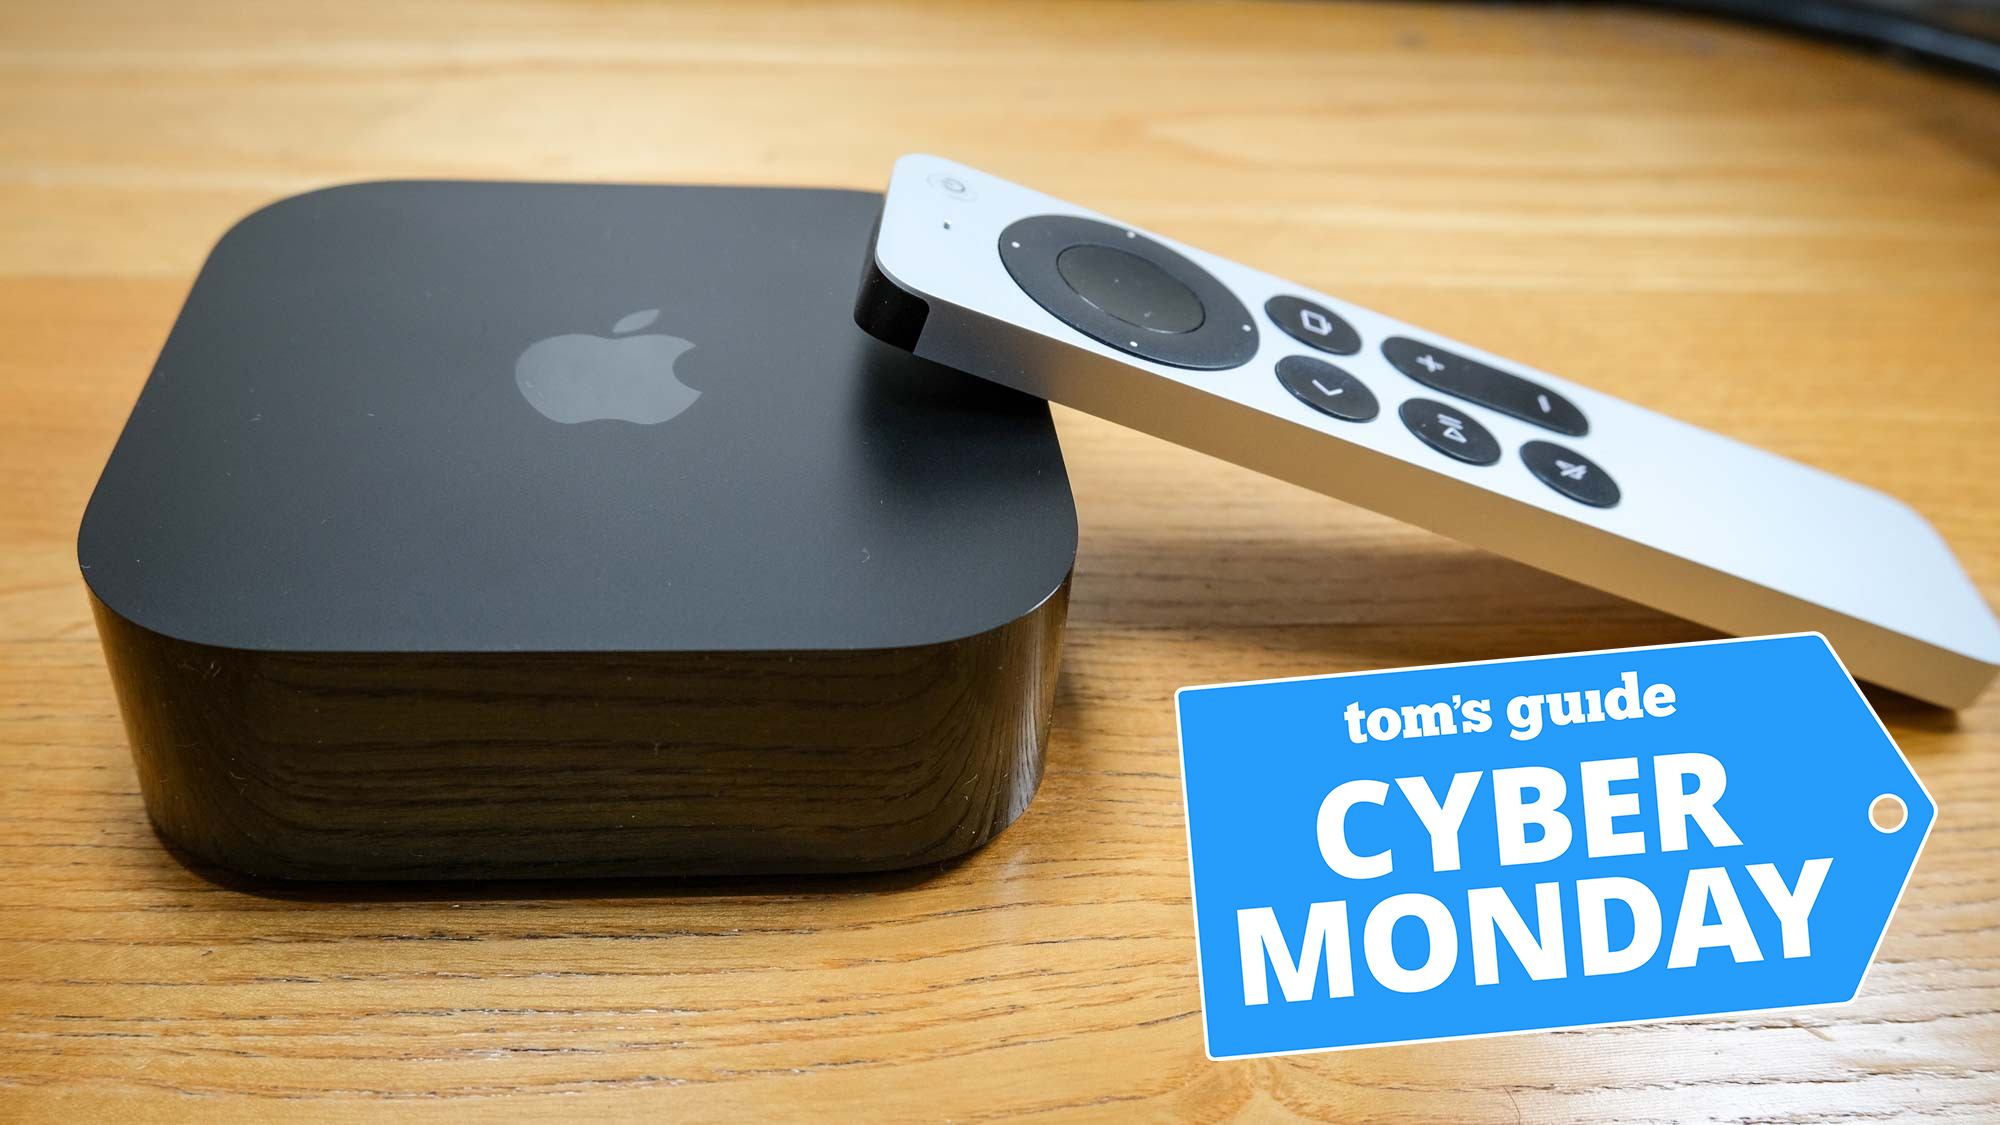 The Apple TV 4K $99 is my favorite Cyber Monday deal | Tom's Guide